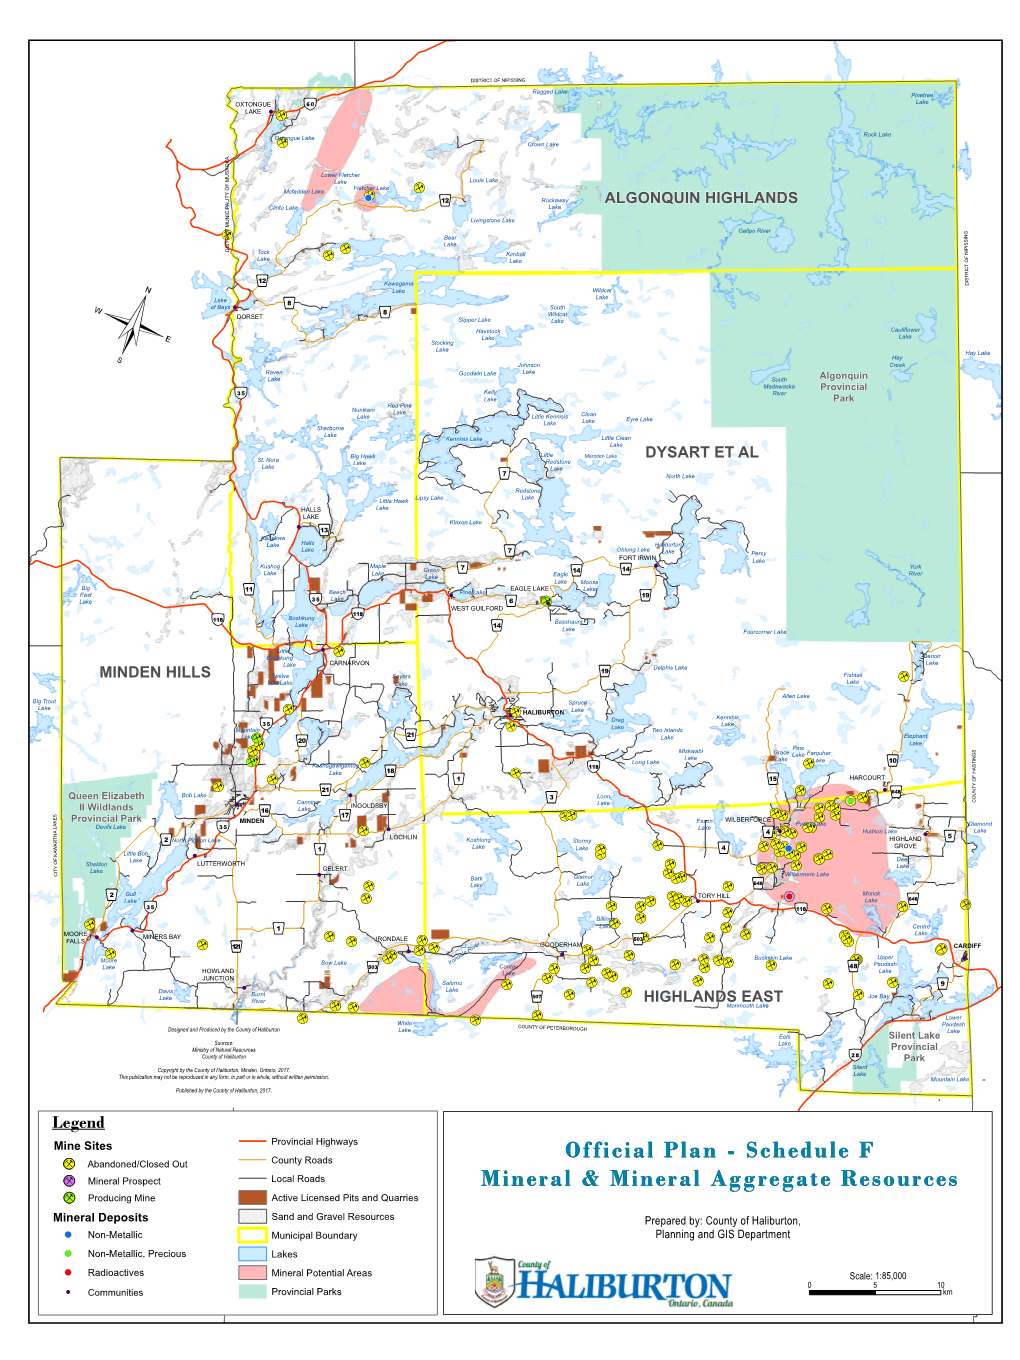 Official Plan - Schedule F I[ Local Roads Mineral Prospect Mineral & Mineral Aggregate Resources I[ Producing Mine Active Licensed Pits and Quarries